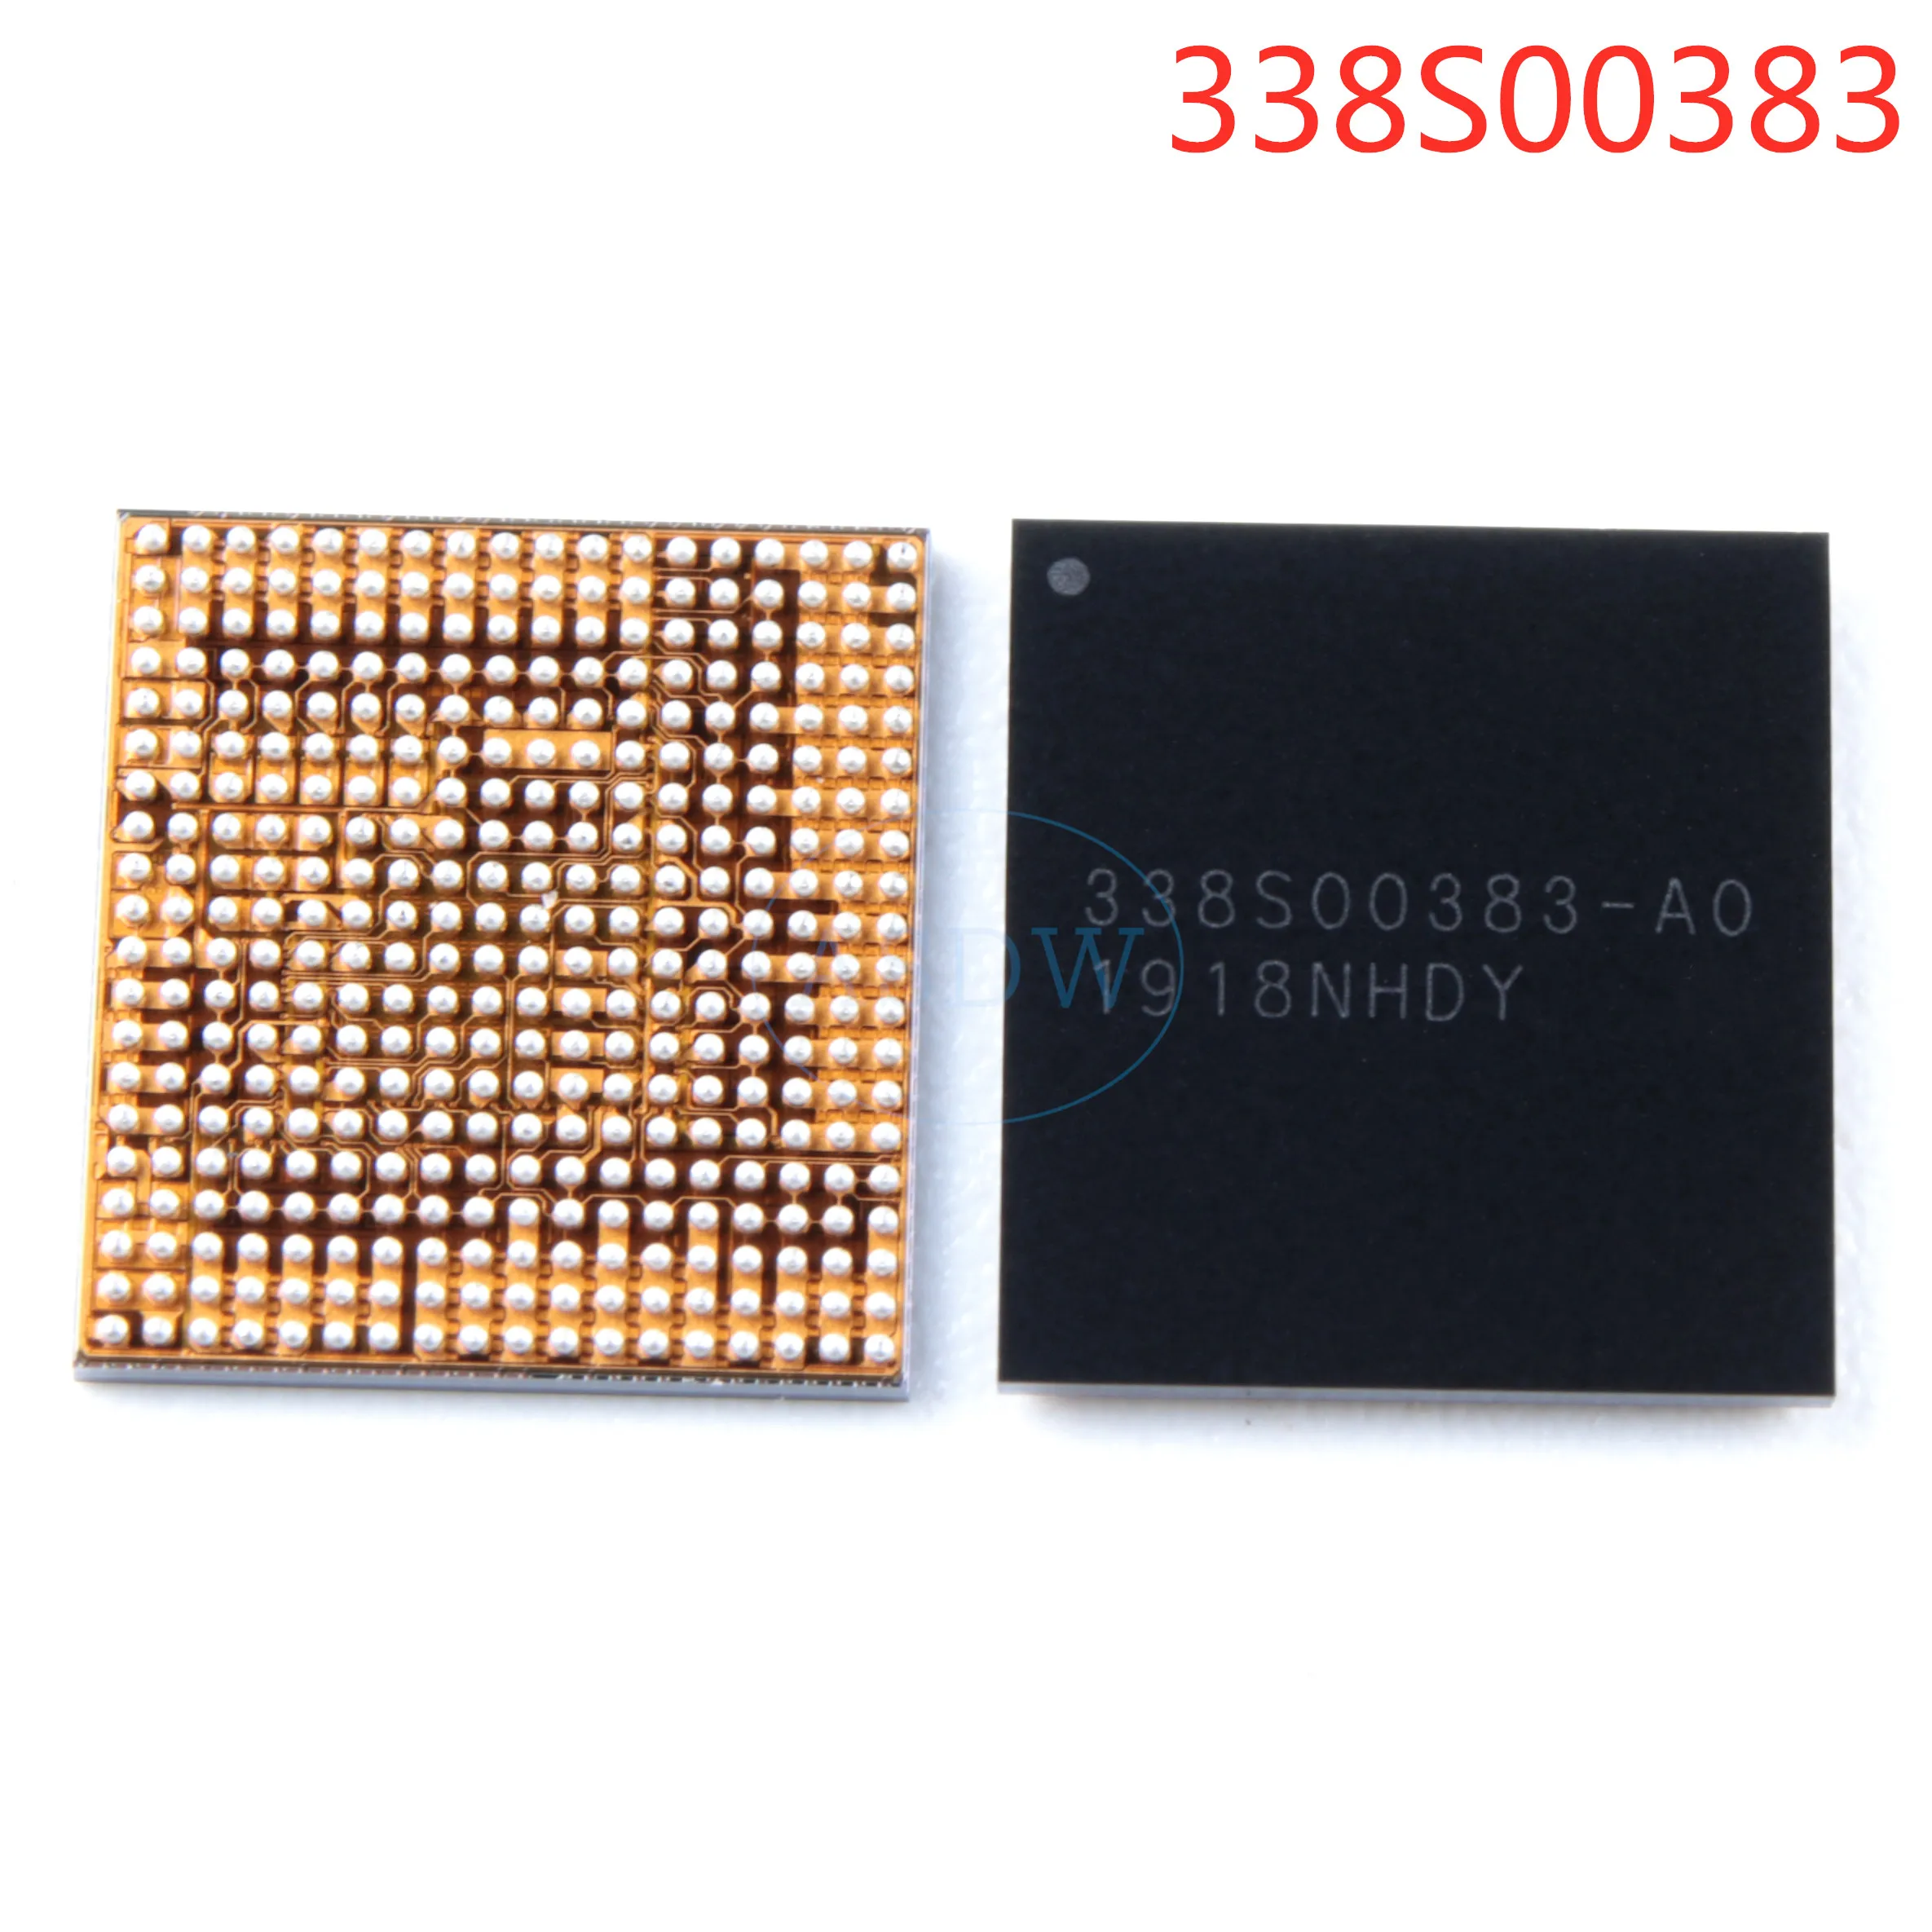 

10Pcs/Lot 100% New 338S00383-A0/U2700 For iPhone XS/XR Main Power IC Big/Large Power Management Chip PM IC PMIC